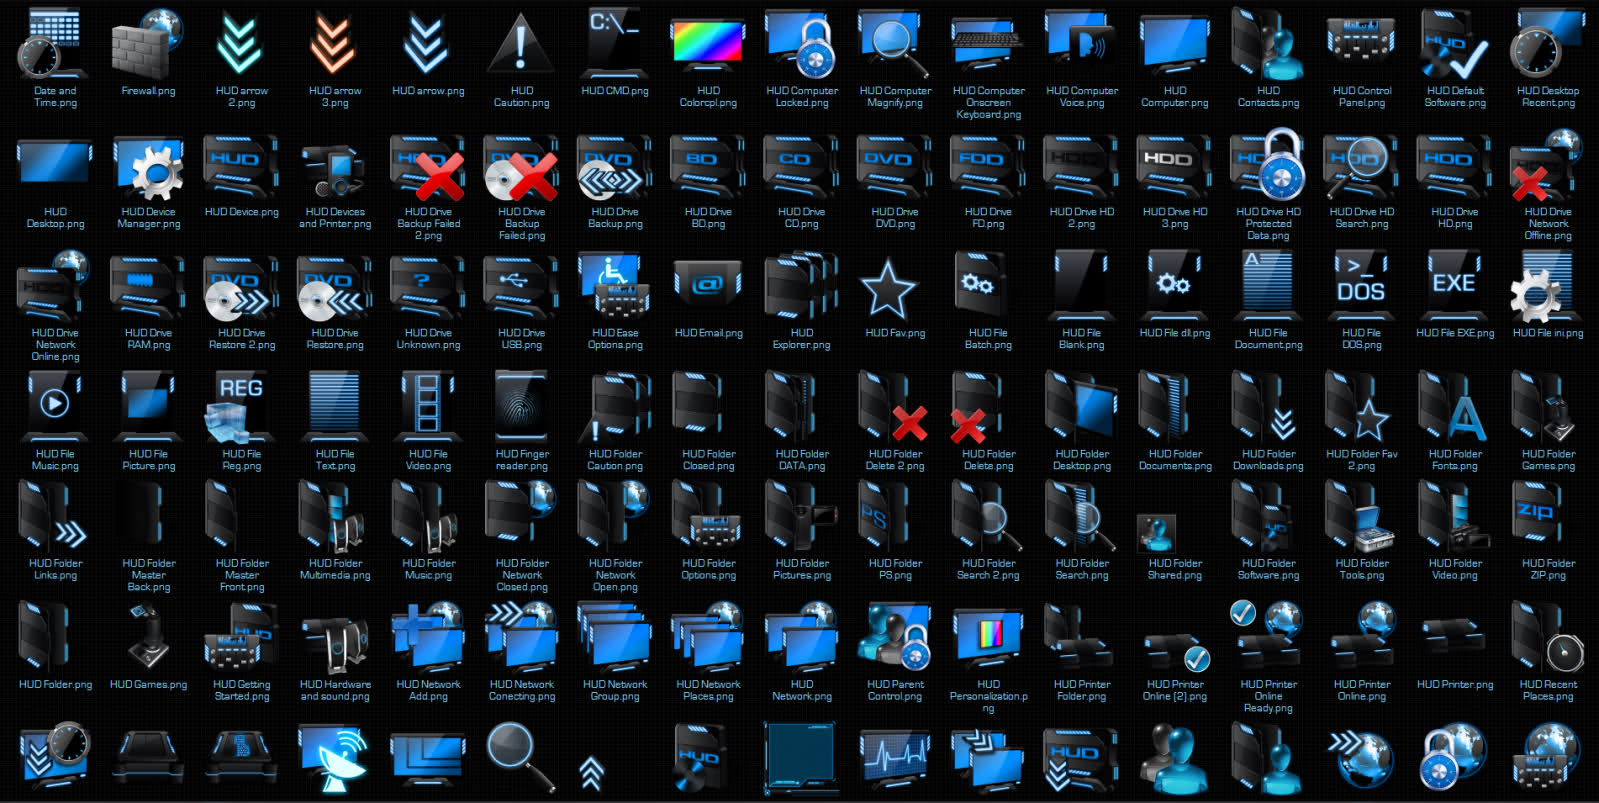 Best way to apply icons or an icon set system wide. - Page 2 